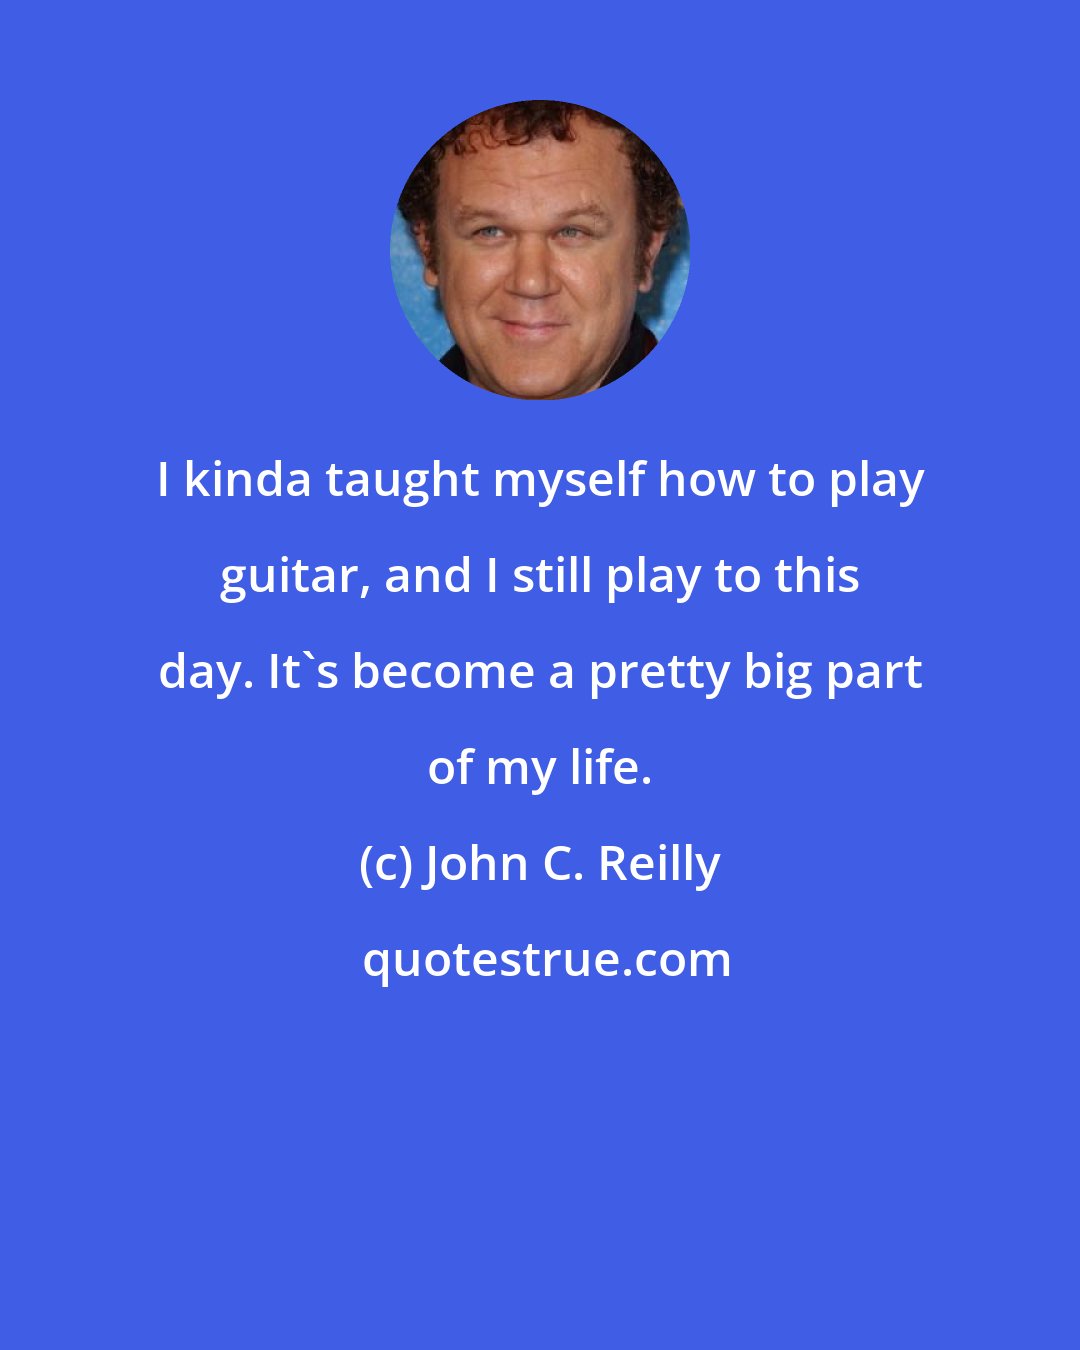 John C. Reilly: I kinda taught myself how to play guitar, and I still play to this day. It's become a pretty big part of my life.